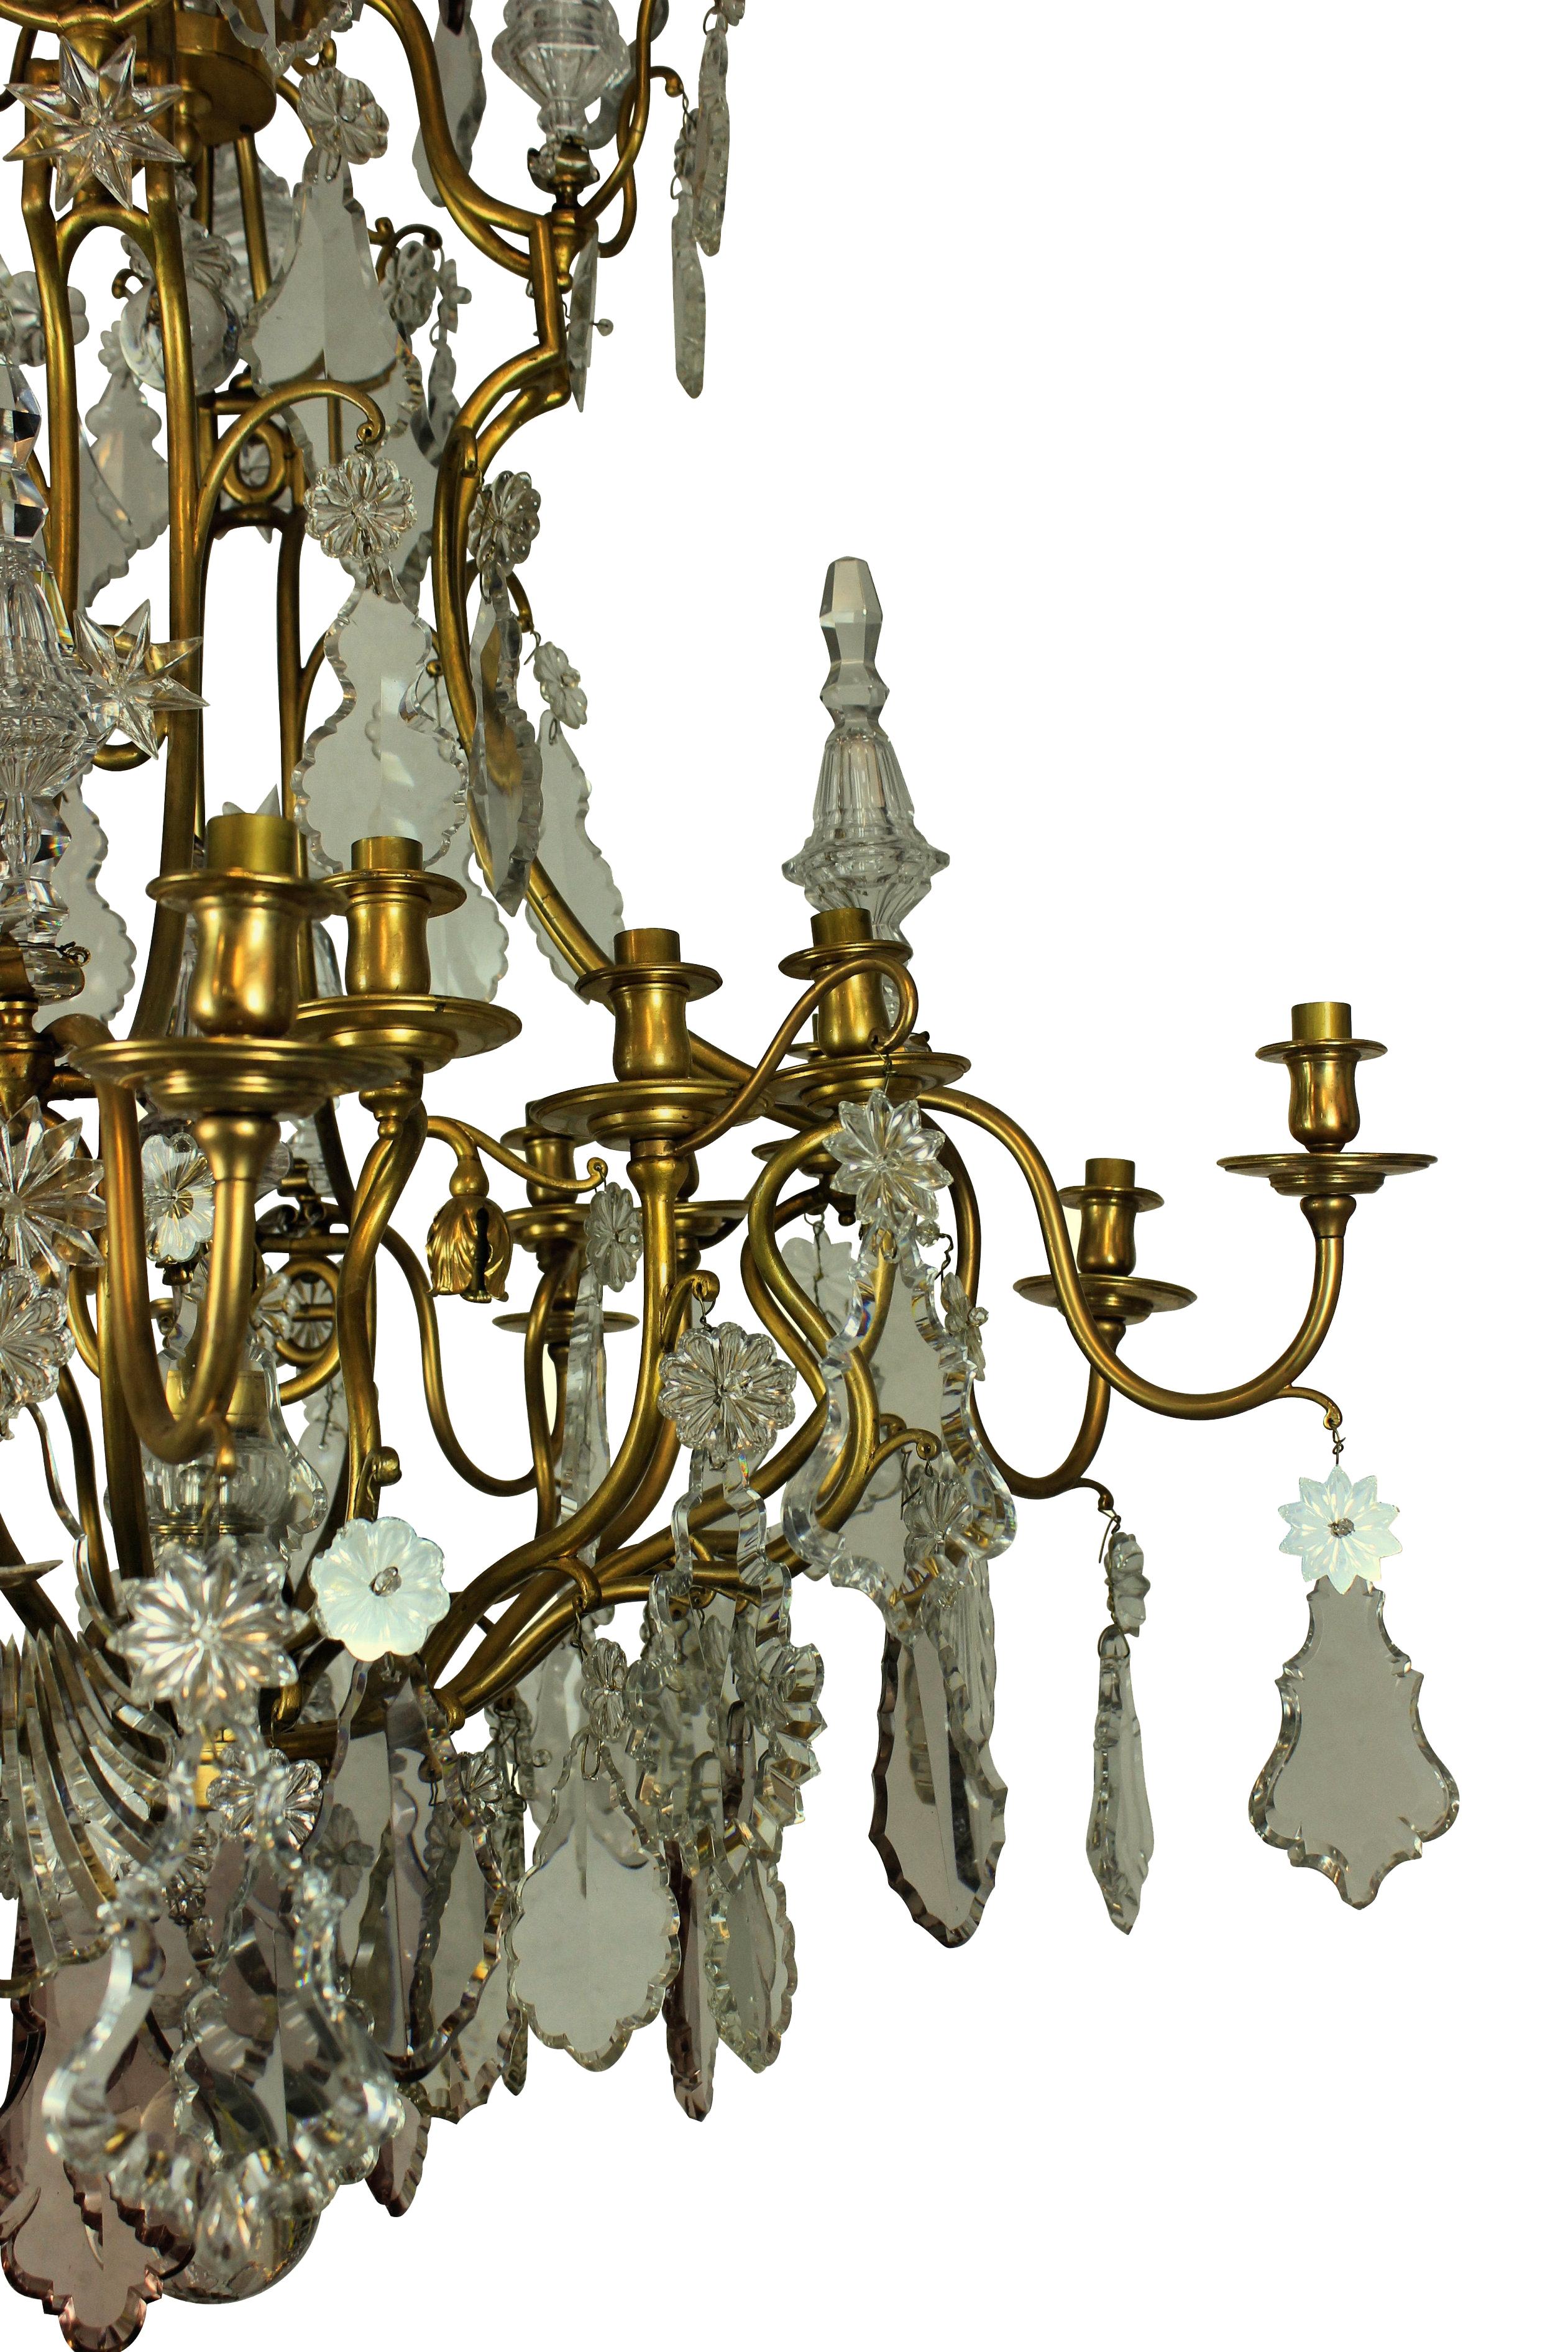 A large ormolu and cut-glass cage chandelier by Baccarat of Paris, en suite with a pair of large wall sconces.
 
 